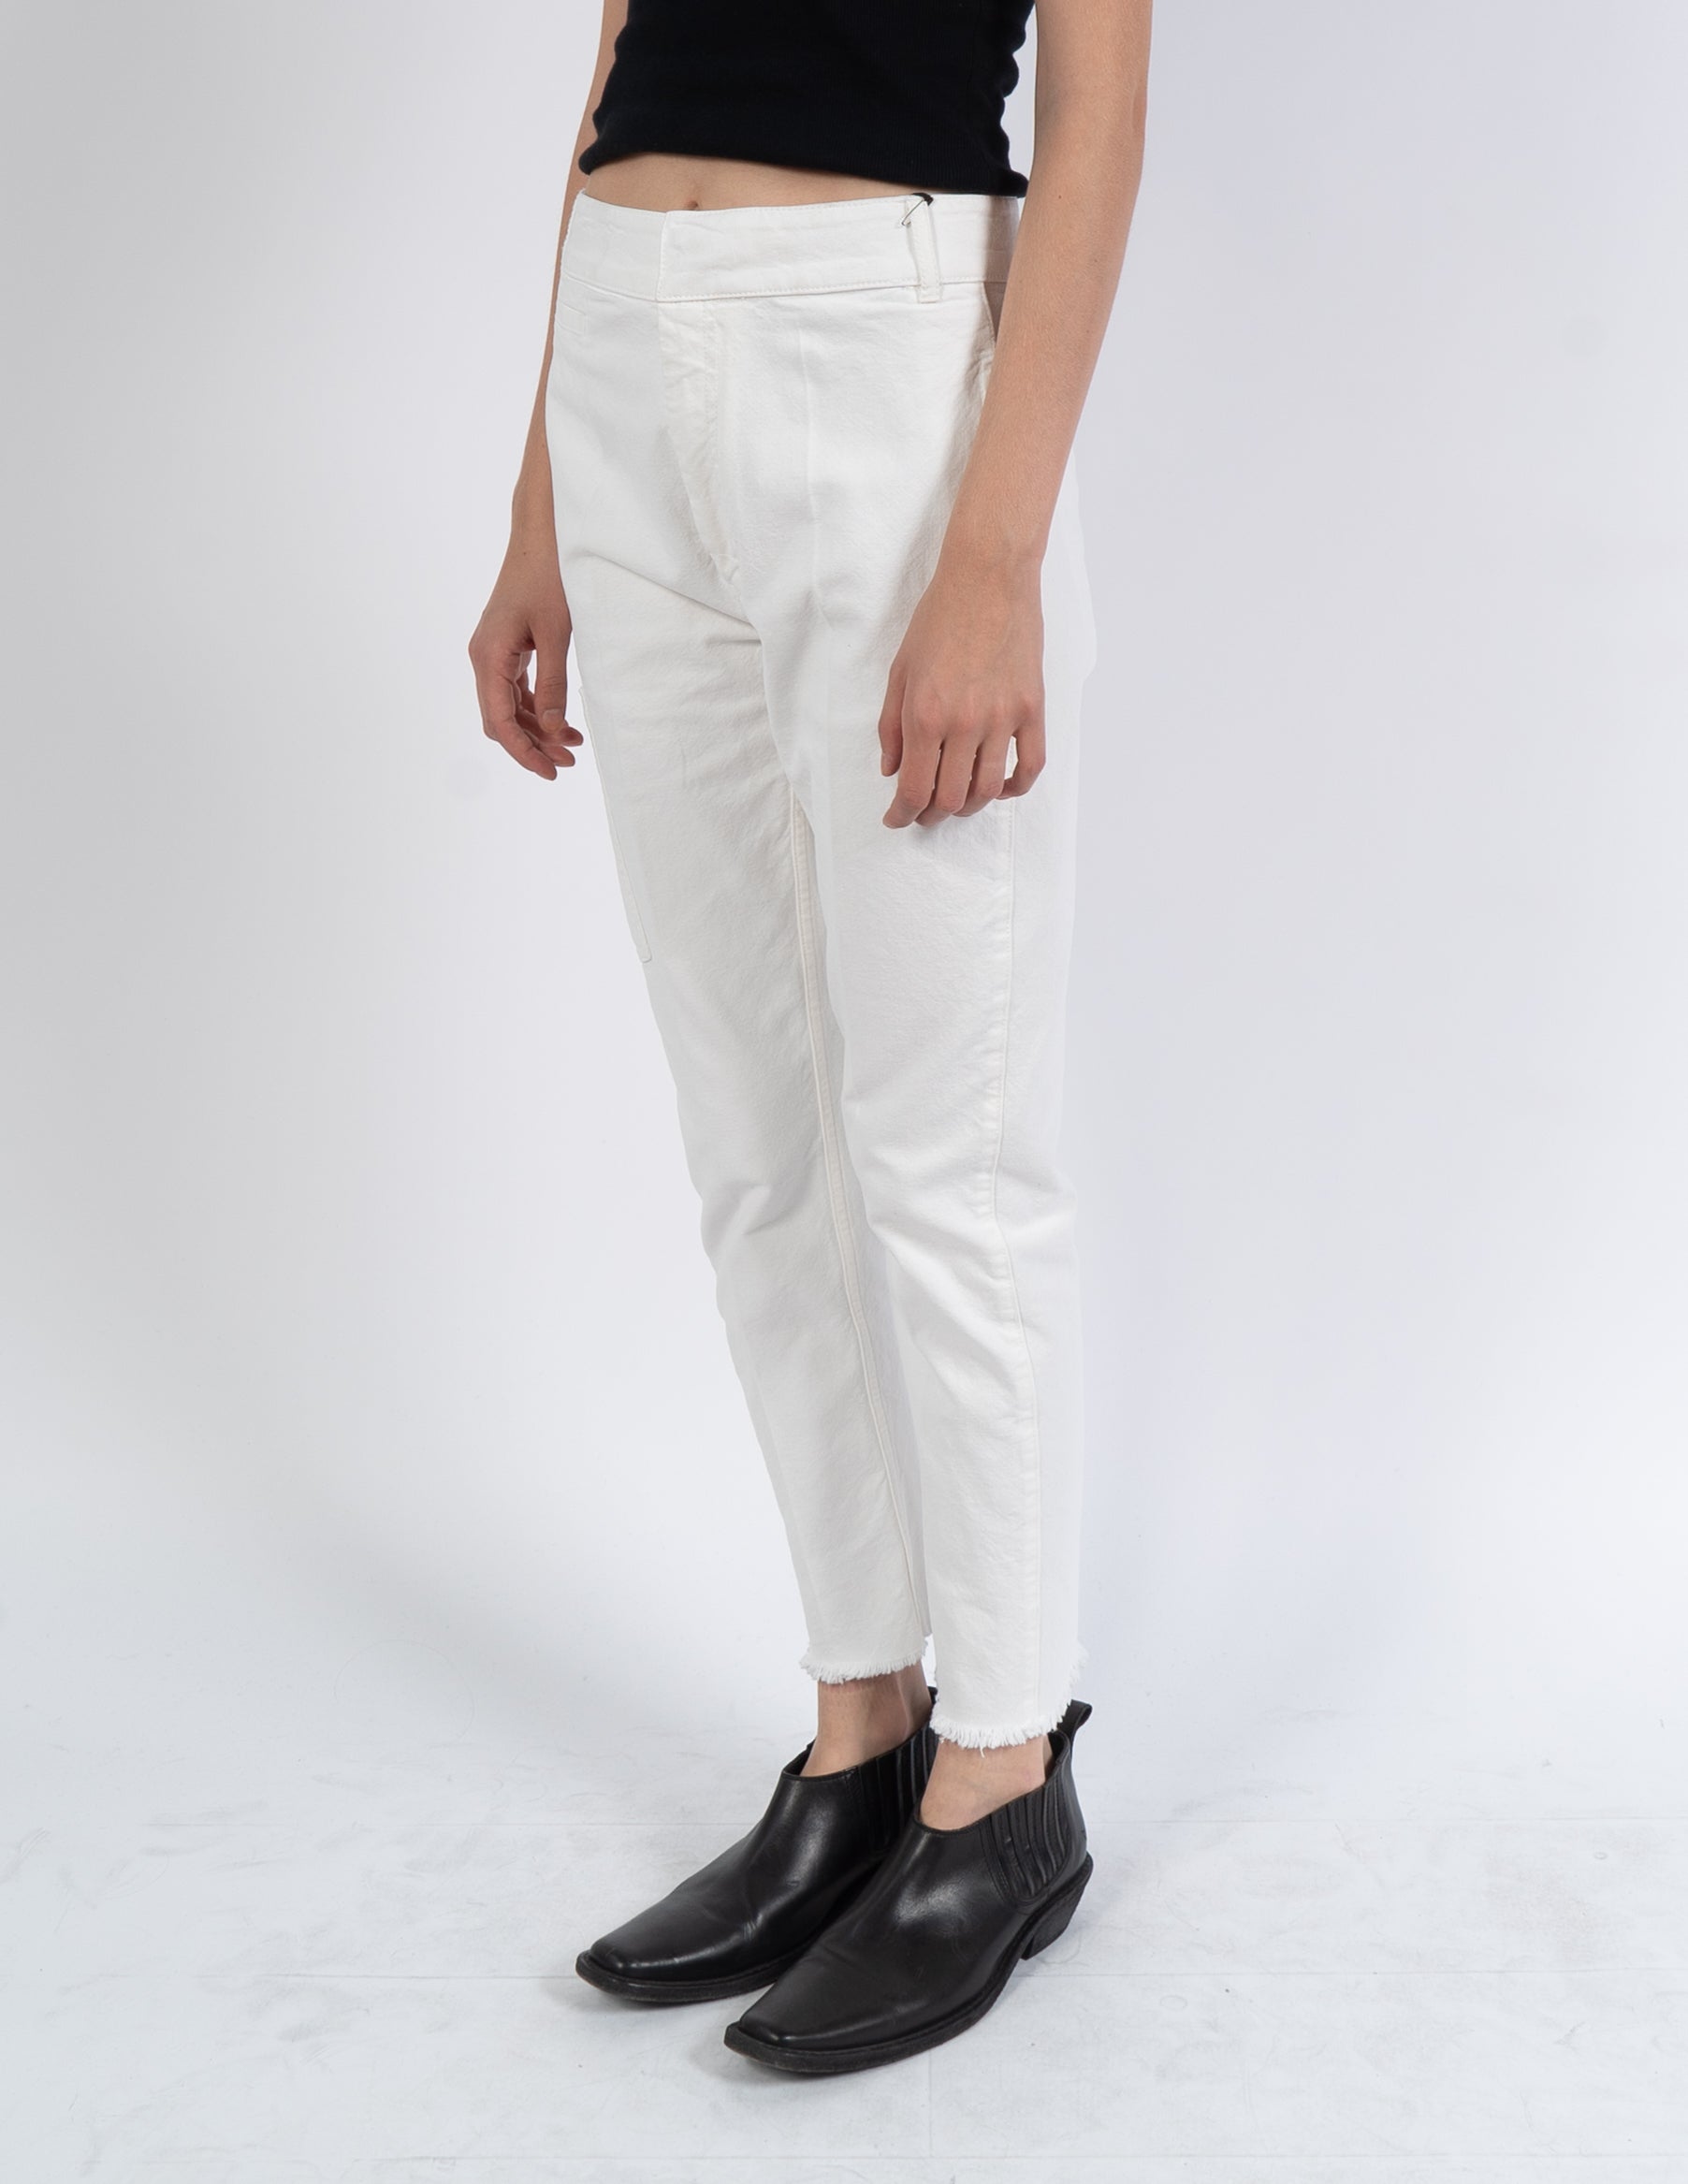 FW19 White Cropped Denim Trousers